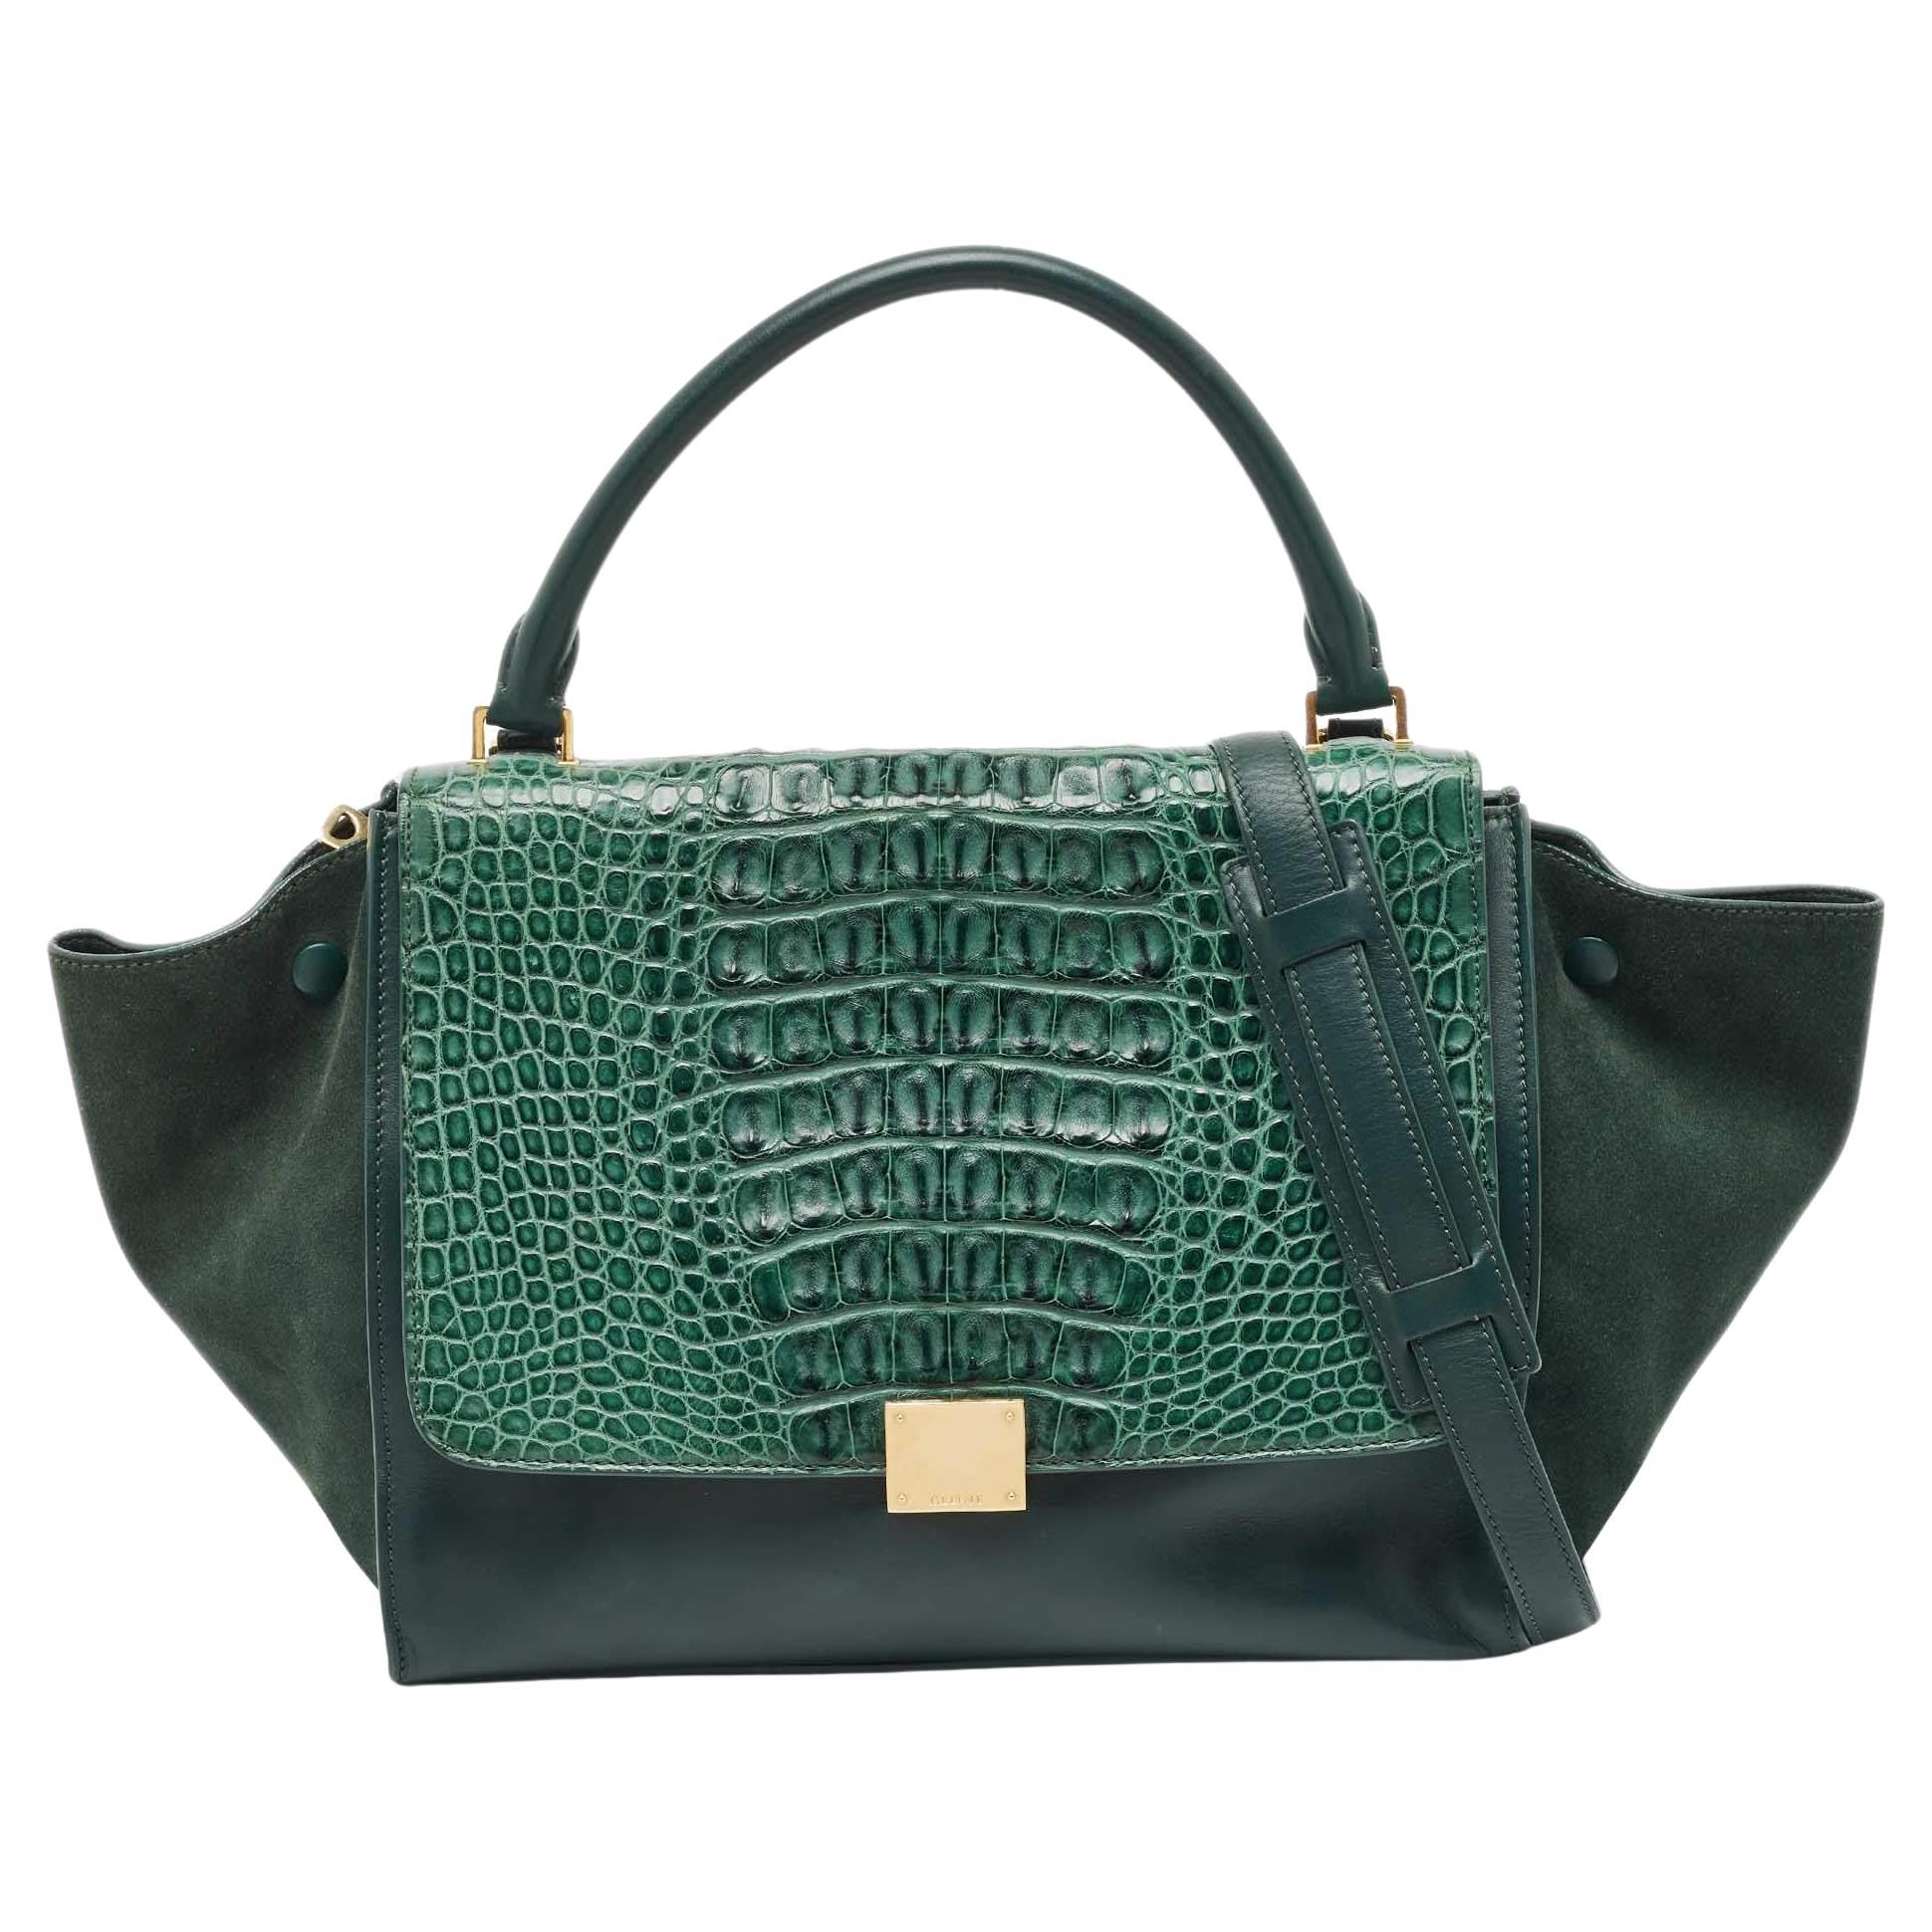 Celine Green Leather and Croc Medium Trapeze Top Handle Bag